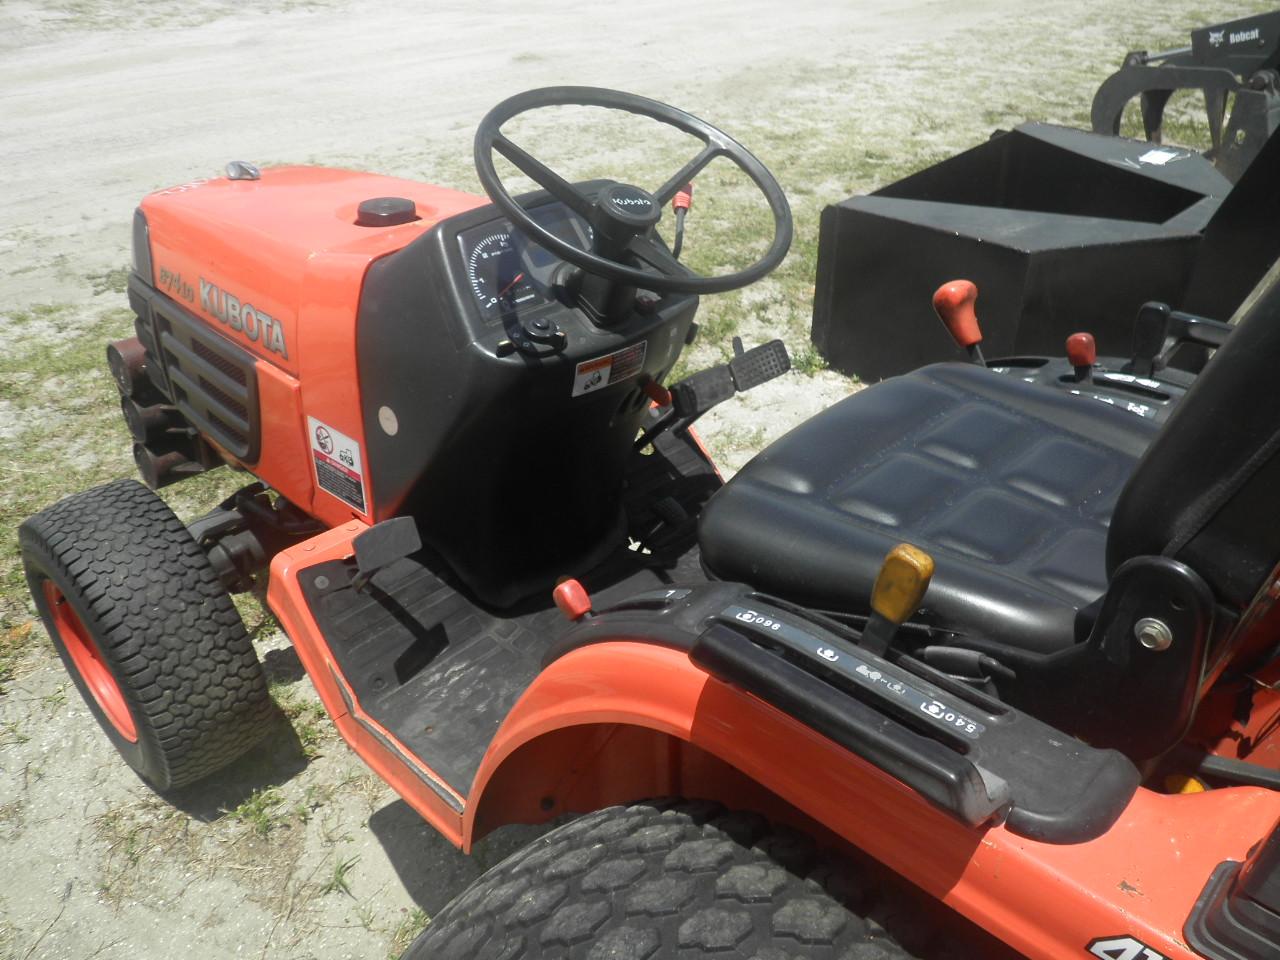 6-01122 (Equip.-Tractor)  Seller:Private/Dealer KUBOTA B7410 DIESEL TRACTOR WITH PTO